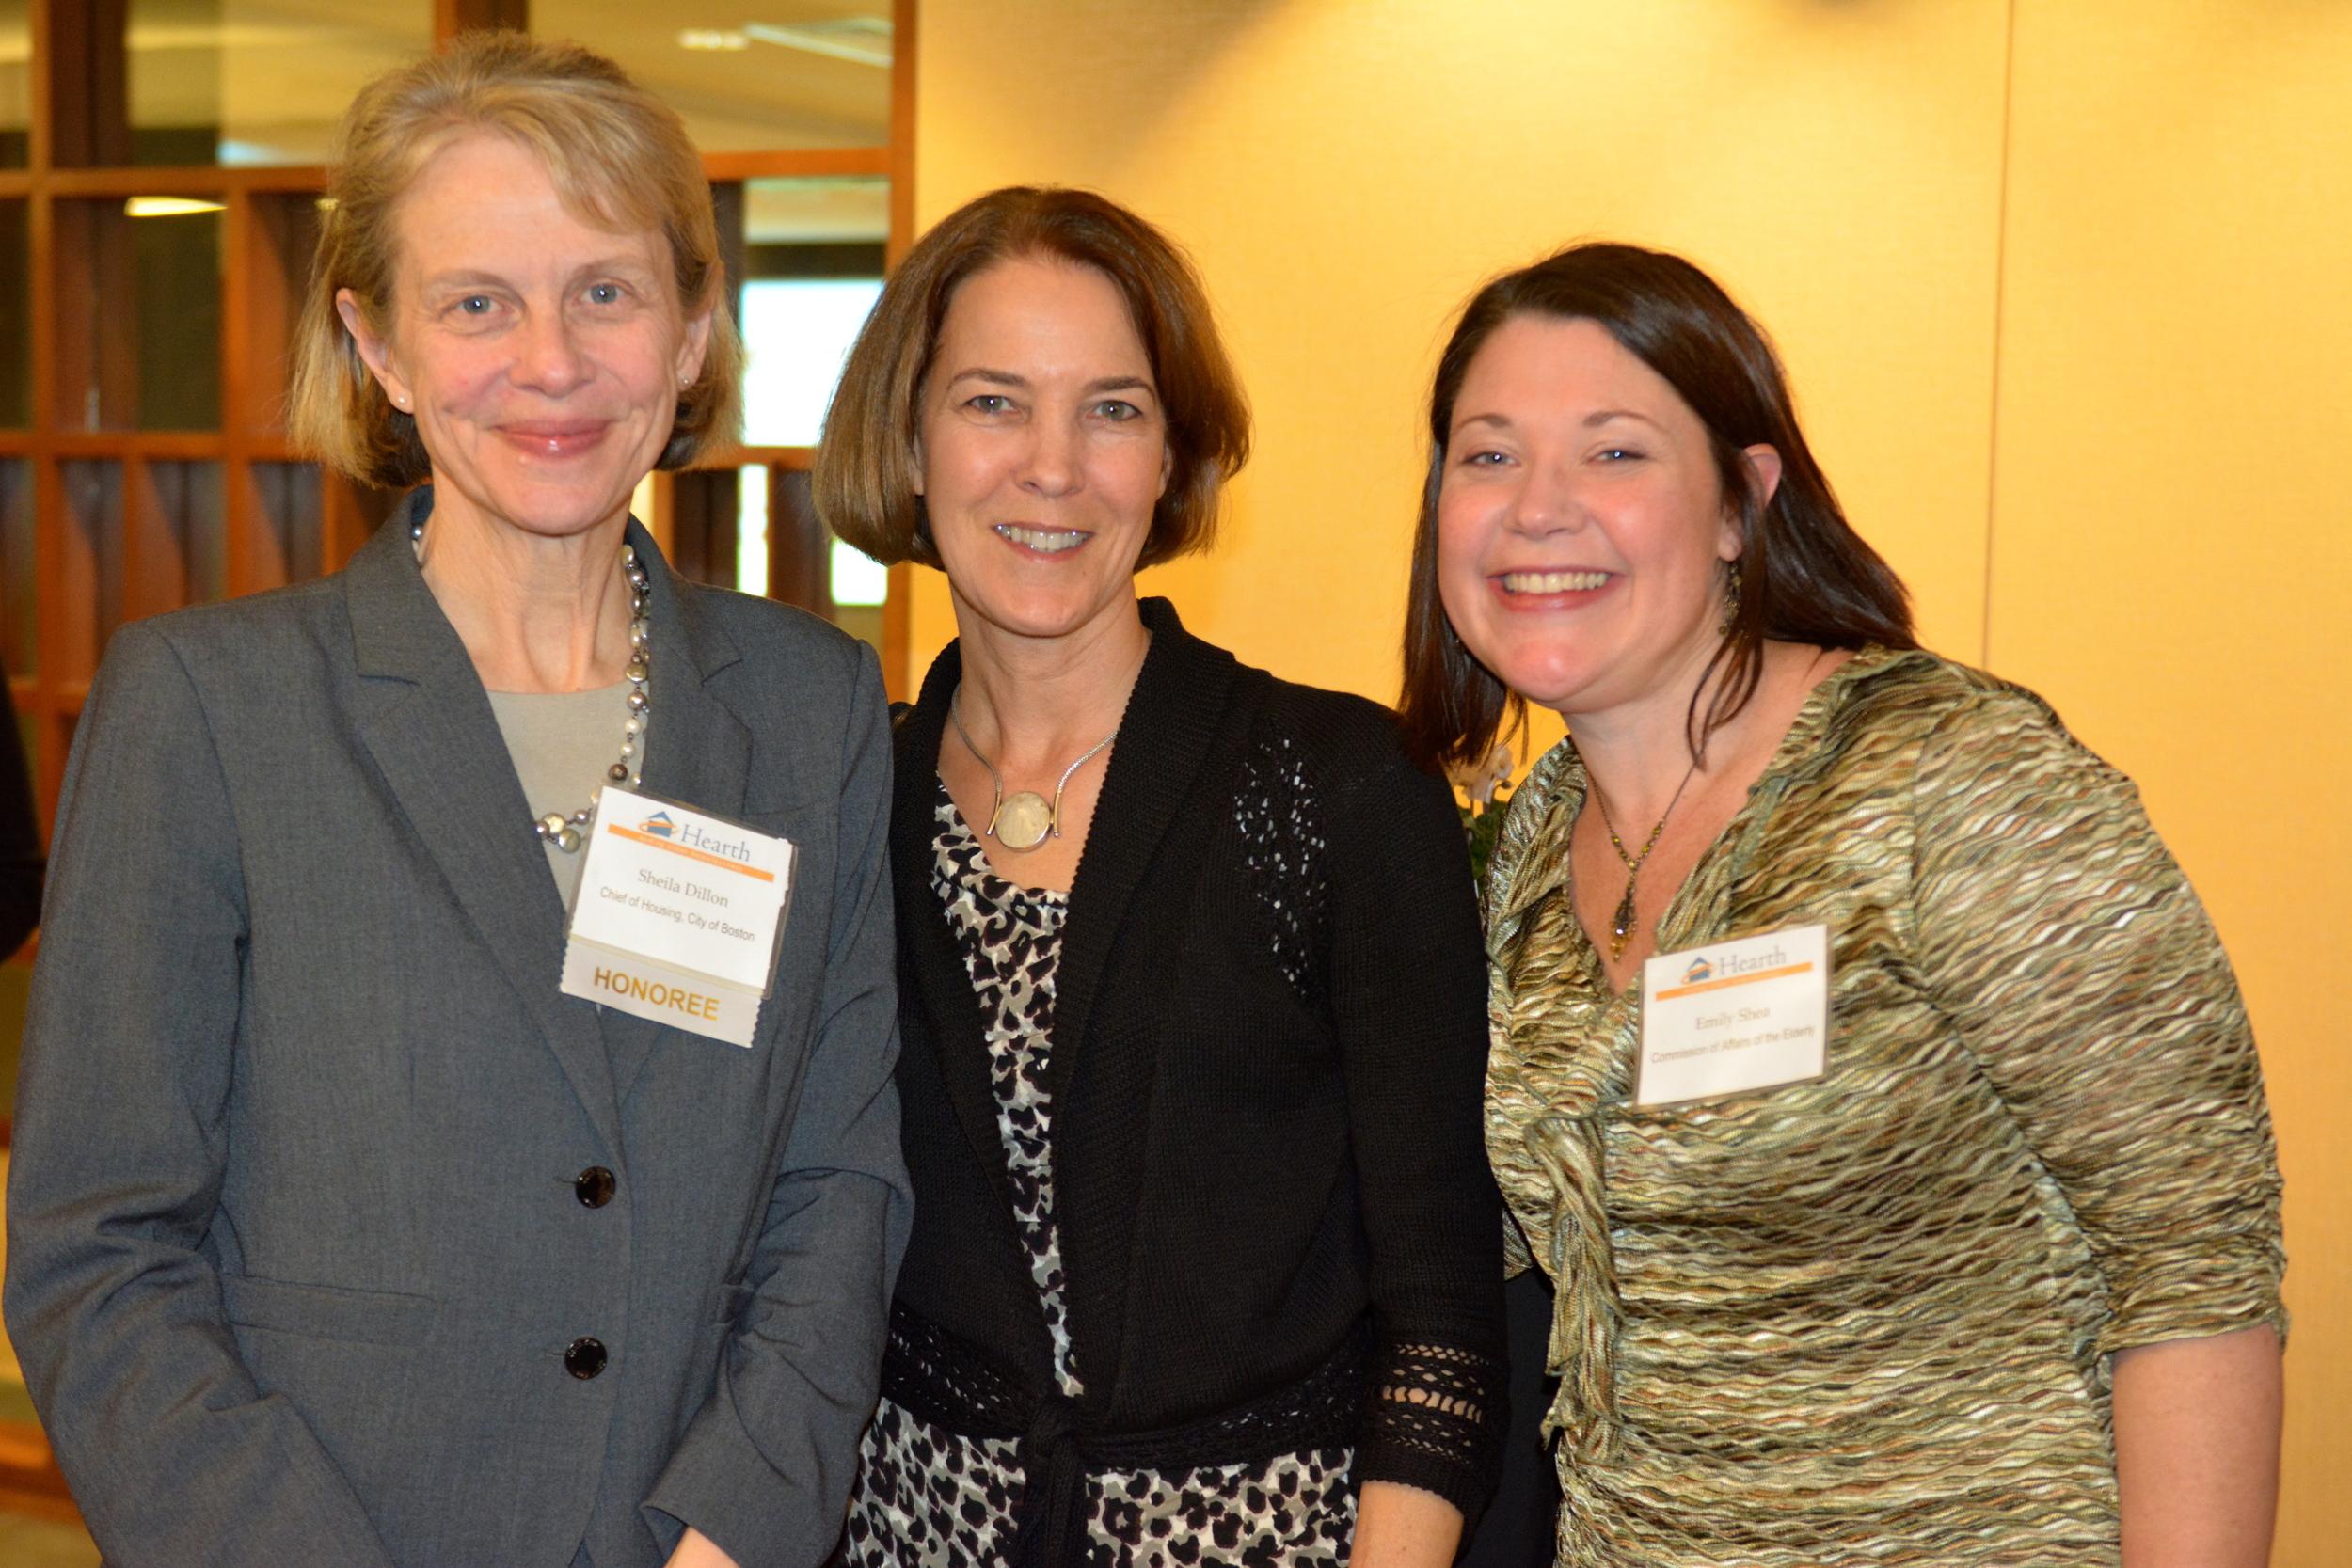  Sheila Dillon (left) with Lisa Alberghini from the Planning Office of Urban Affairs&nbsp;and Emily Shea, City of Boston's Commissioner of Elderly Affairs 